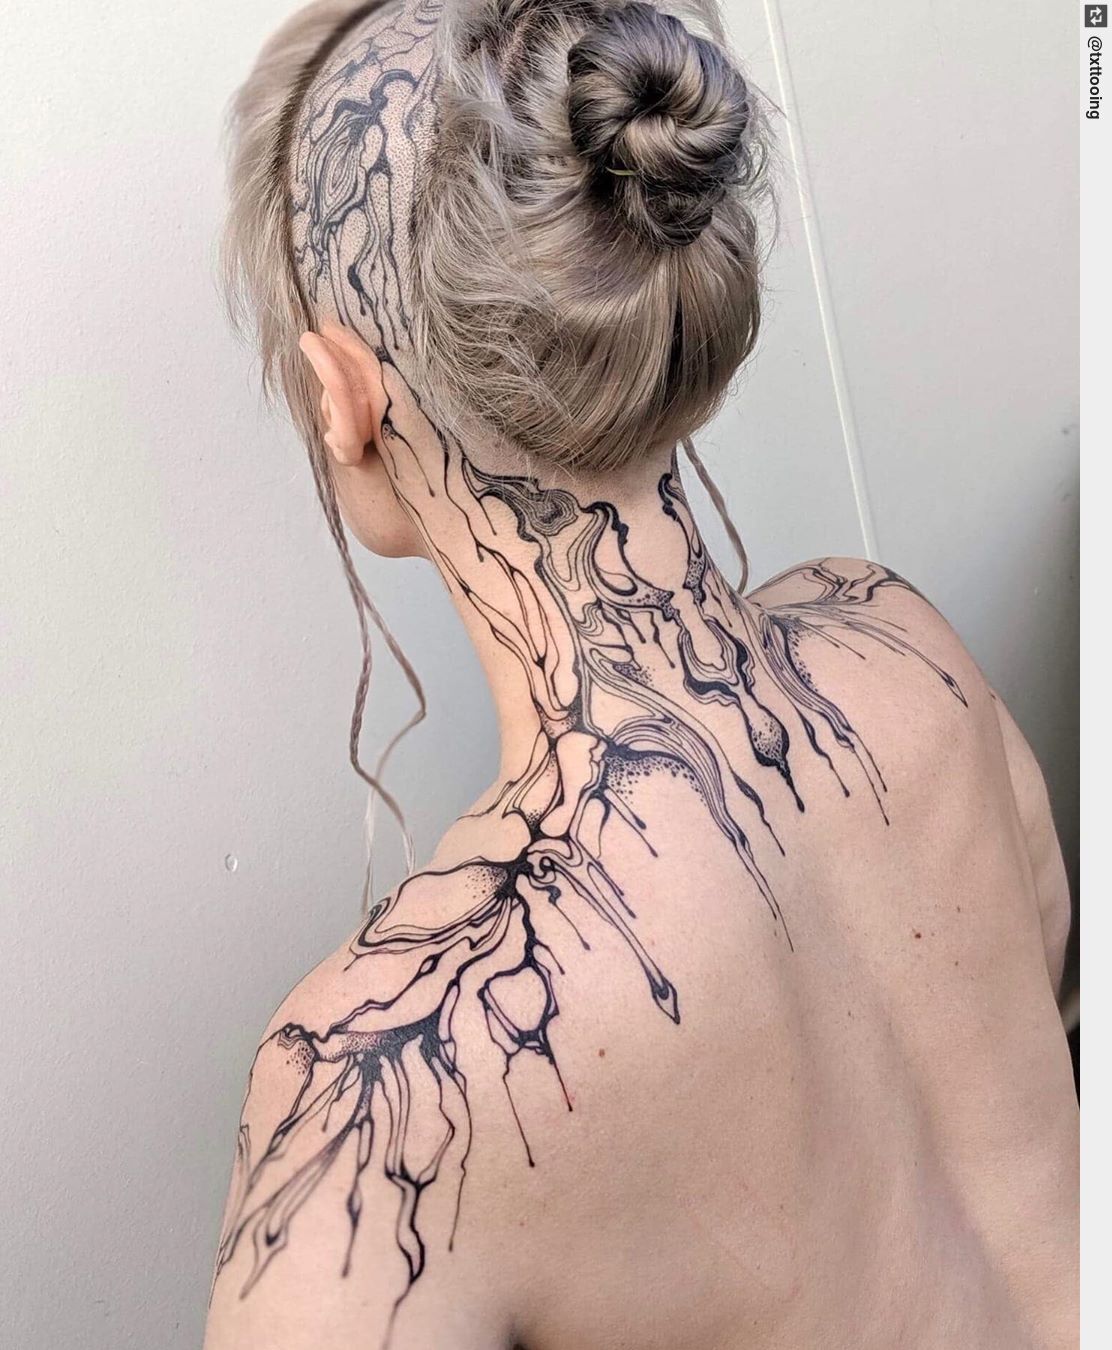 Blackwork  Abstract  Texture Tattooing su Instagram Decorative  botanical neck piece fully healed to compliment work by meliiseye and  mattsager Swipe to see fresh video More to come on